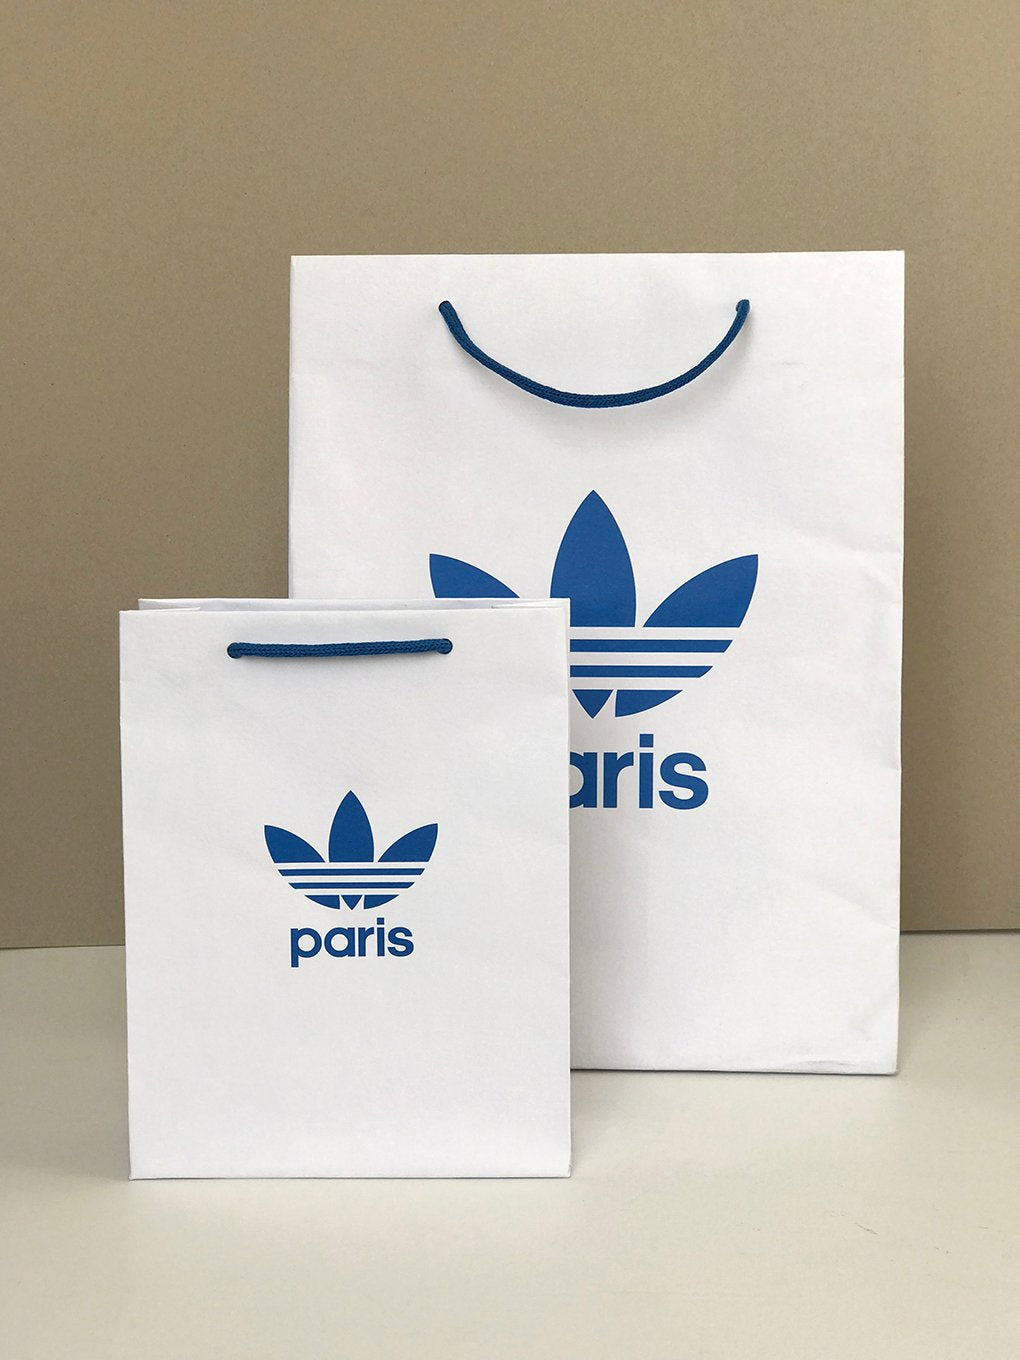 Adidas Originals bags - 2 limited edition paper from Adidas – Frenetic